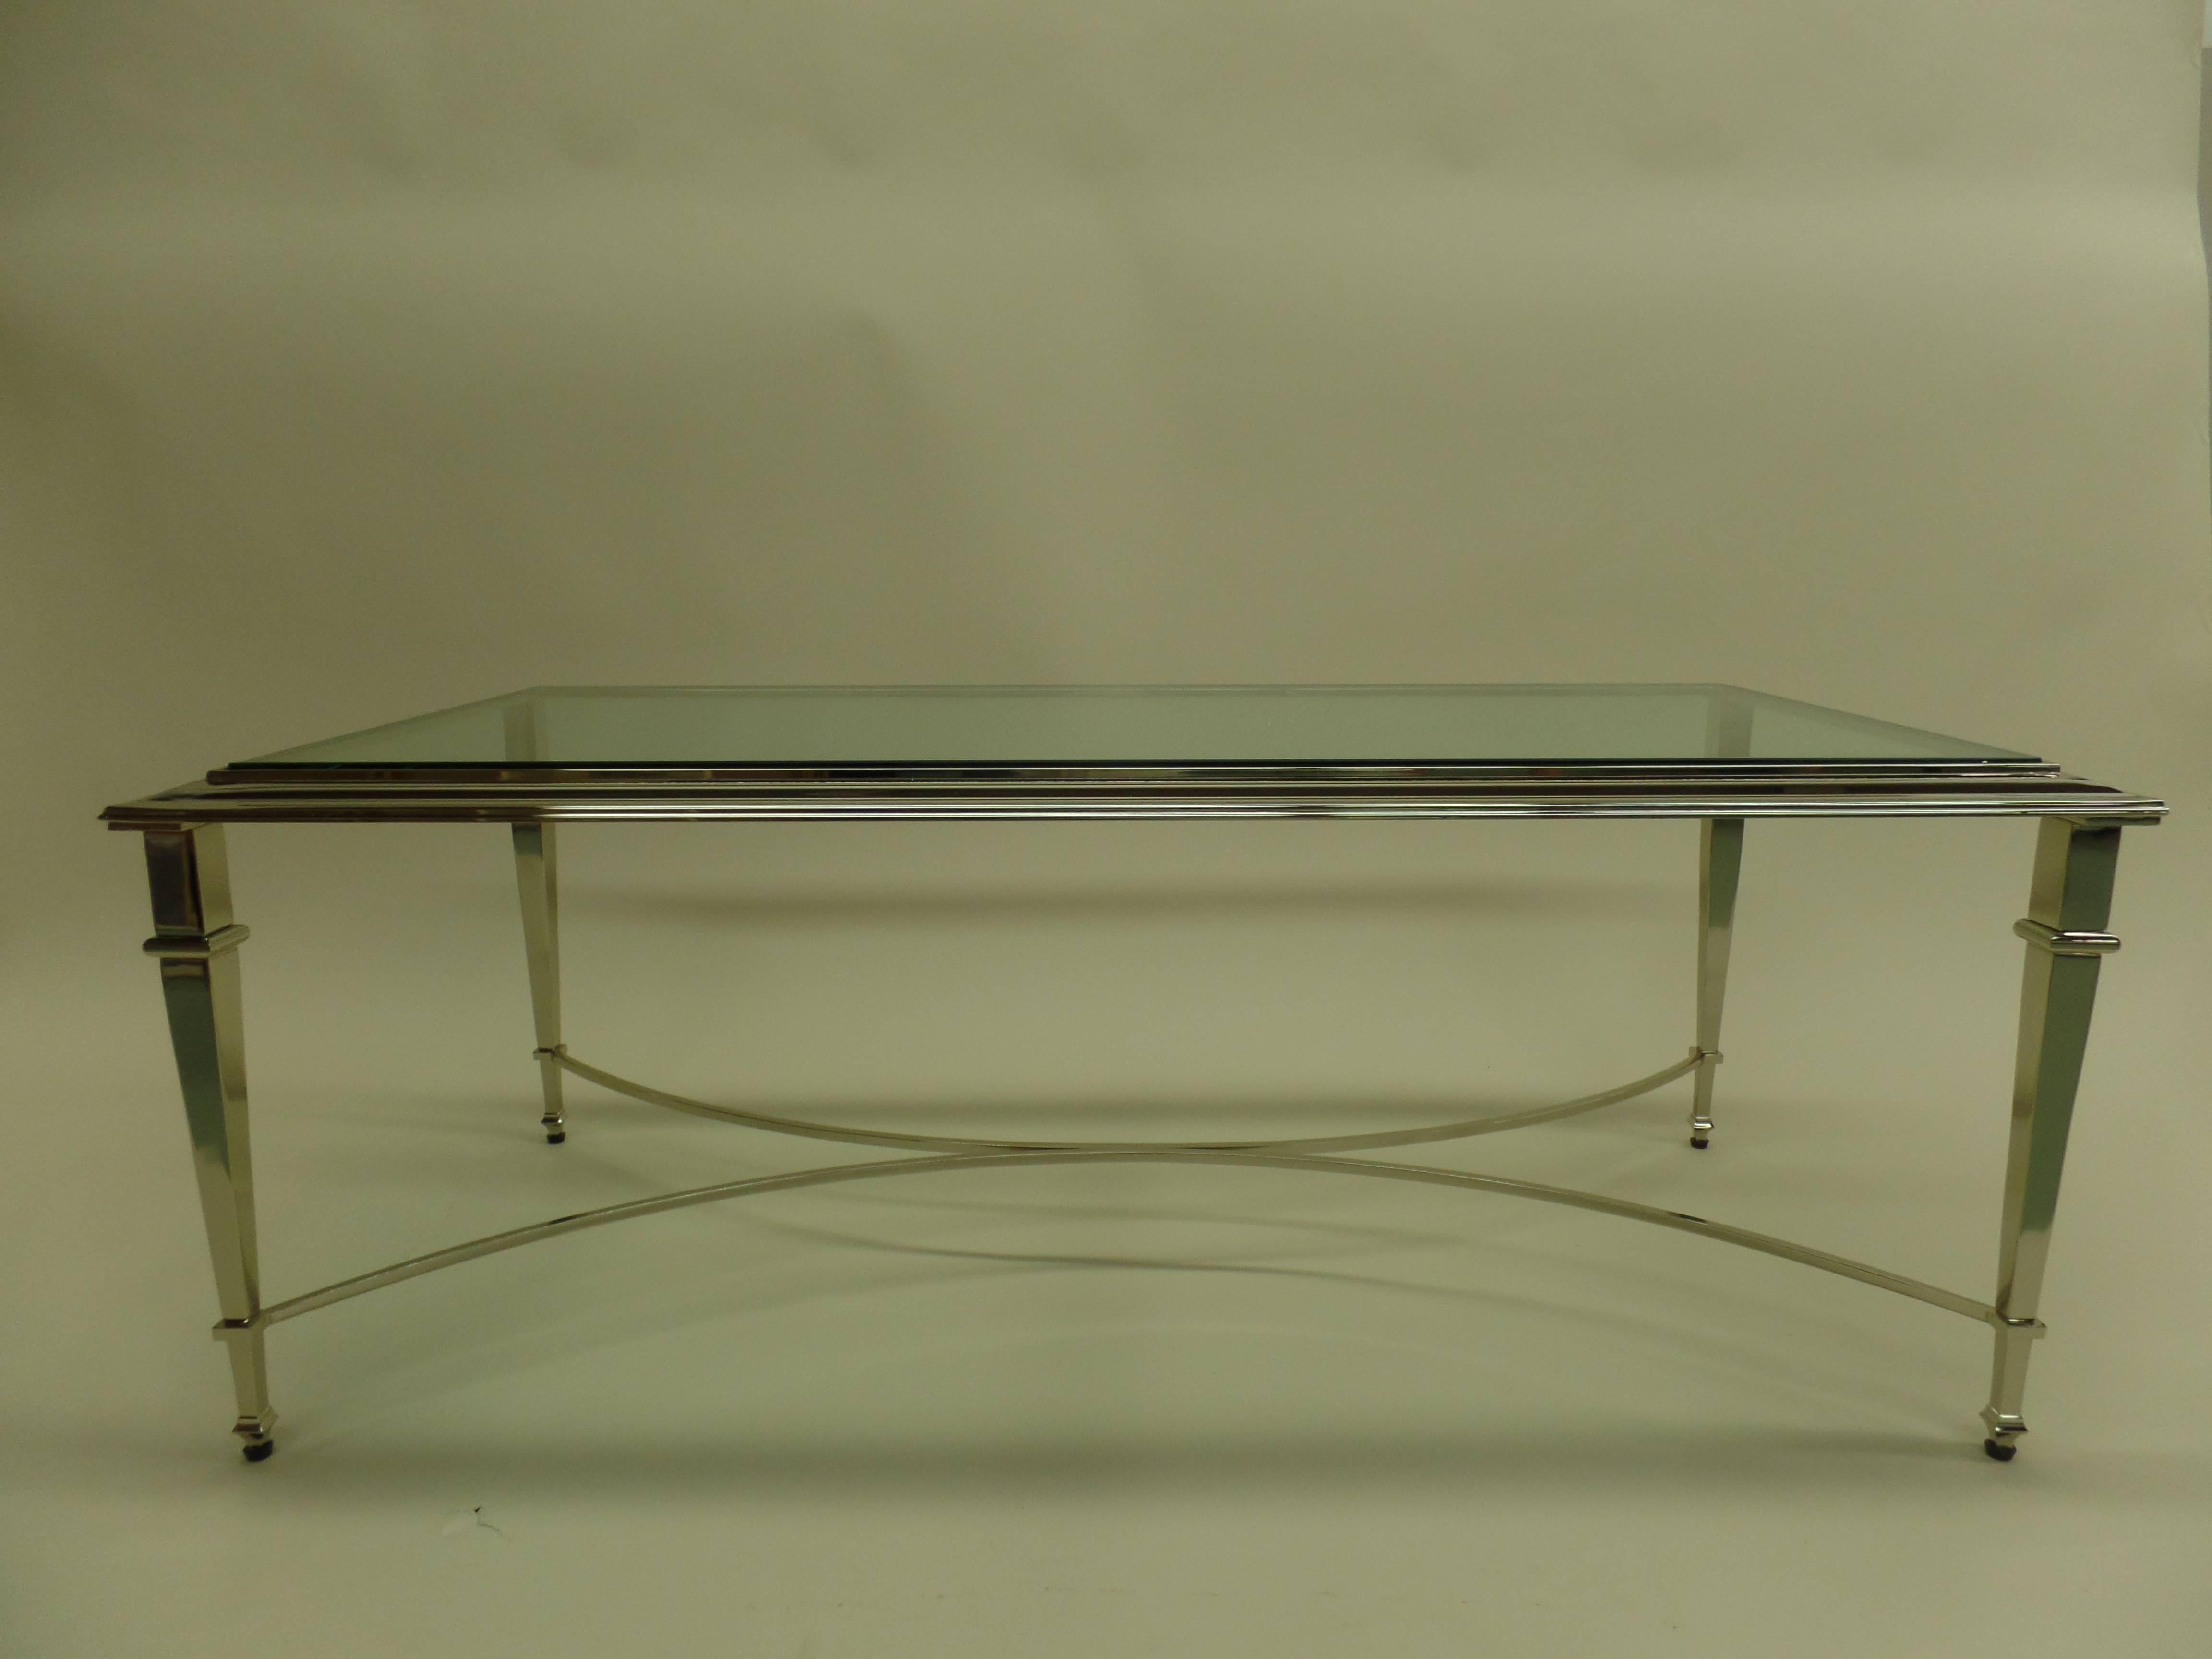 Elegant, timeless French Mid-Century Modern style cocktail table in the neoclassical spirit of Maison Ramsay.

The piece is delicately nickeled with stunning, tapered legs united by an X-frame stretcher. The top is raised, characteristic of Ramsay